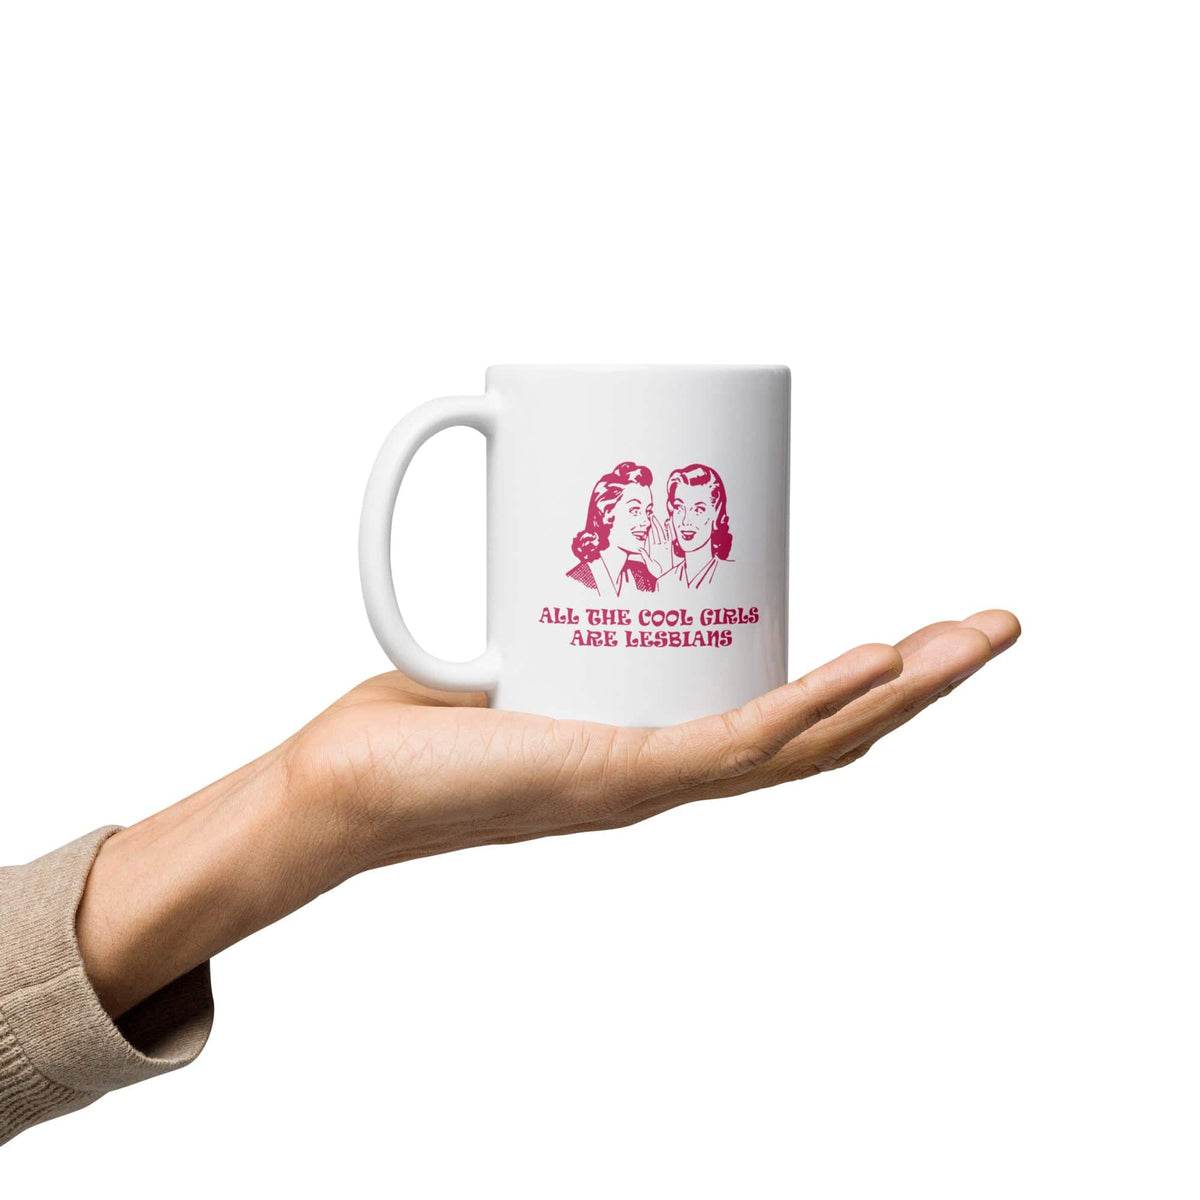 All The Cool Girls Are Lesbians White glossy mug